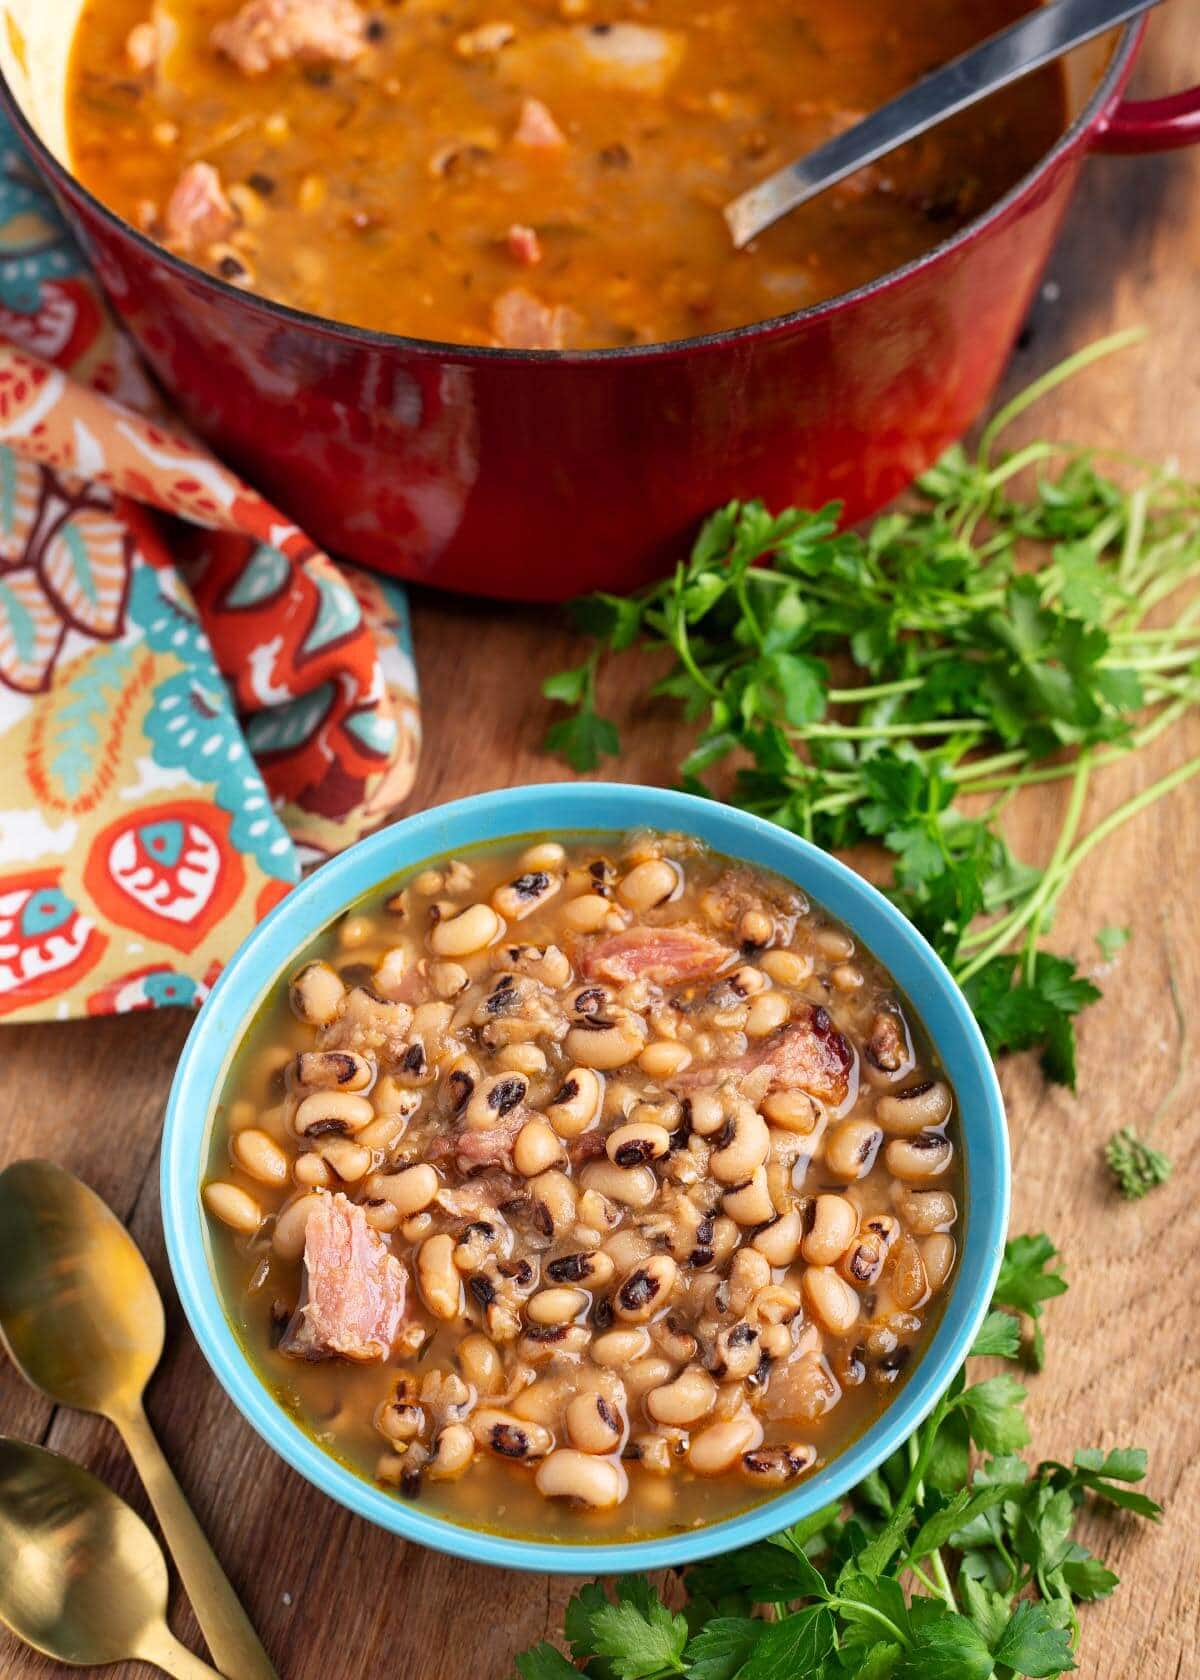 Black-Eyed Peas in a blue bowl and a red pot